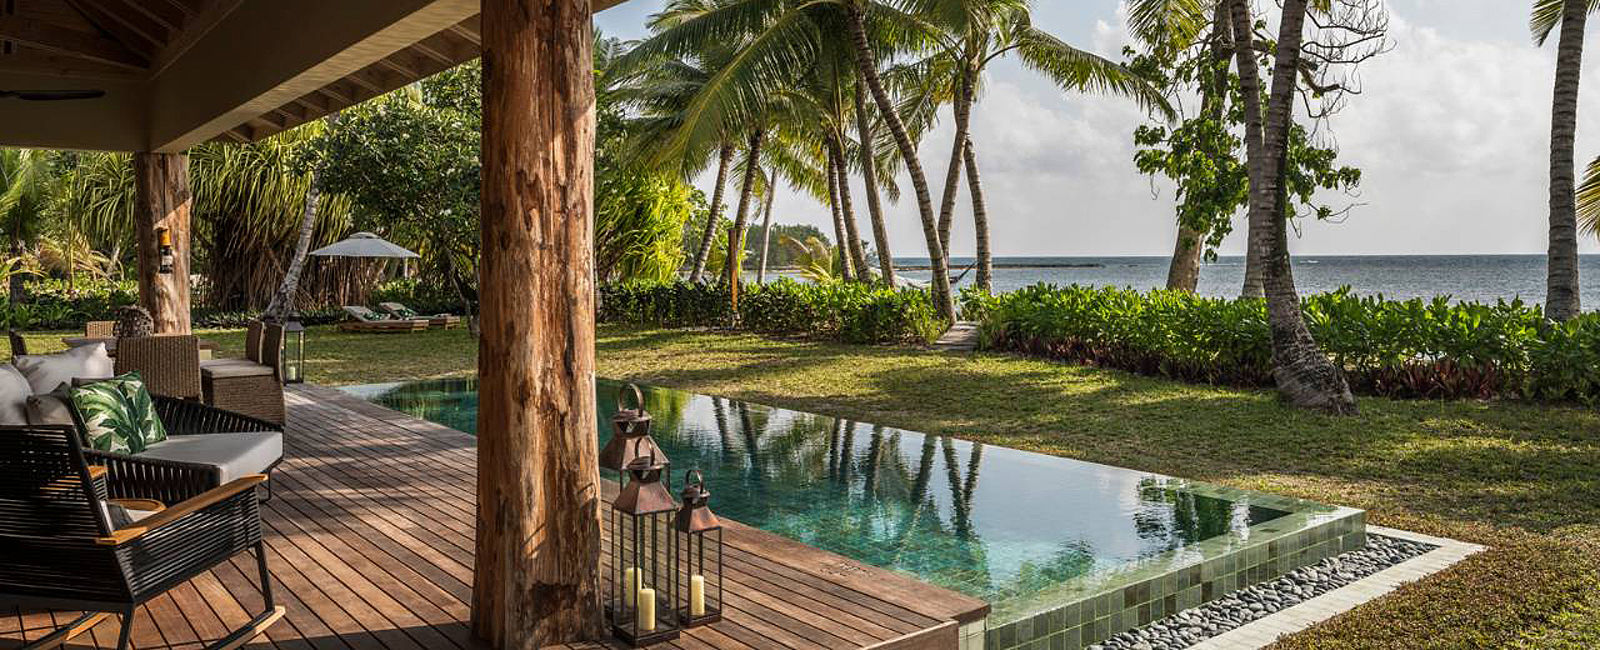 HOTEL ANGEBOTE
 Four Seasons Desroches: Twice the Paradise 
